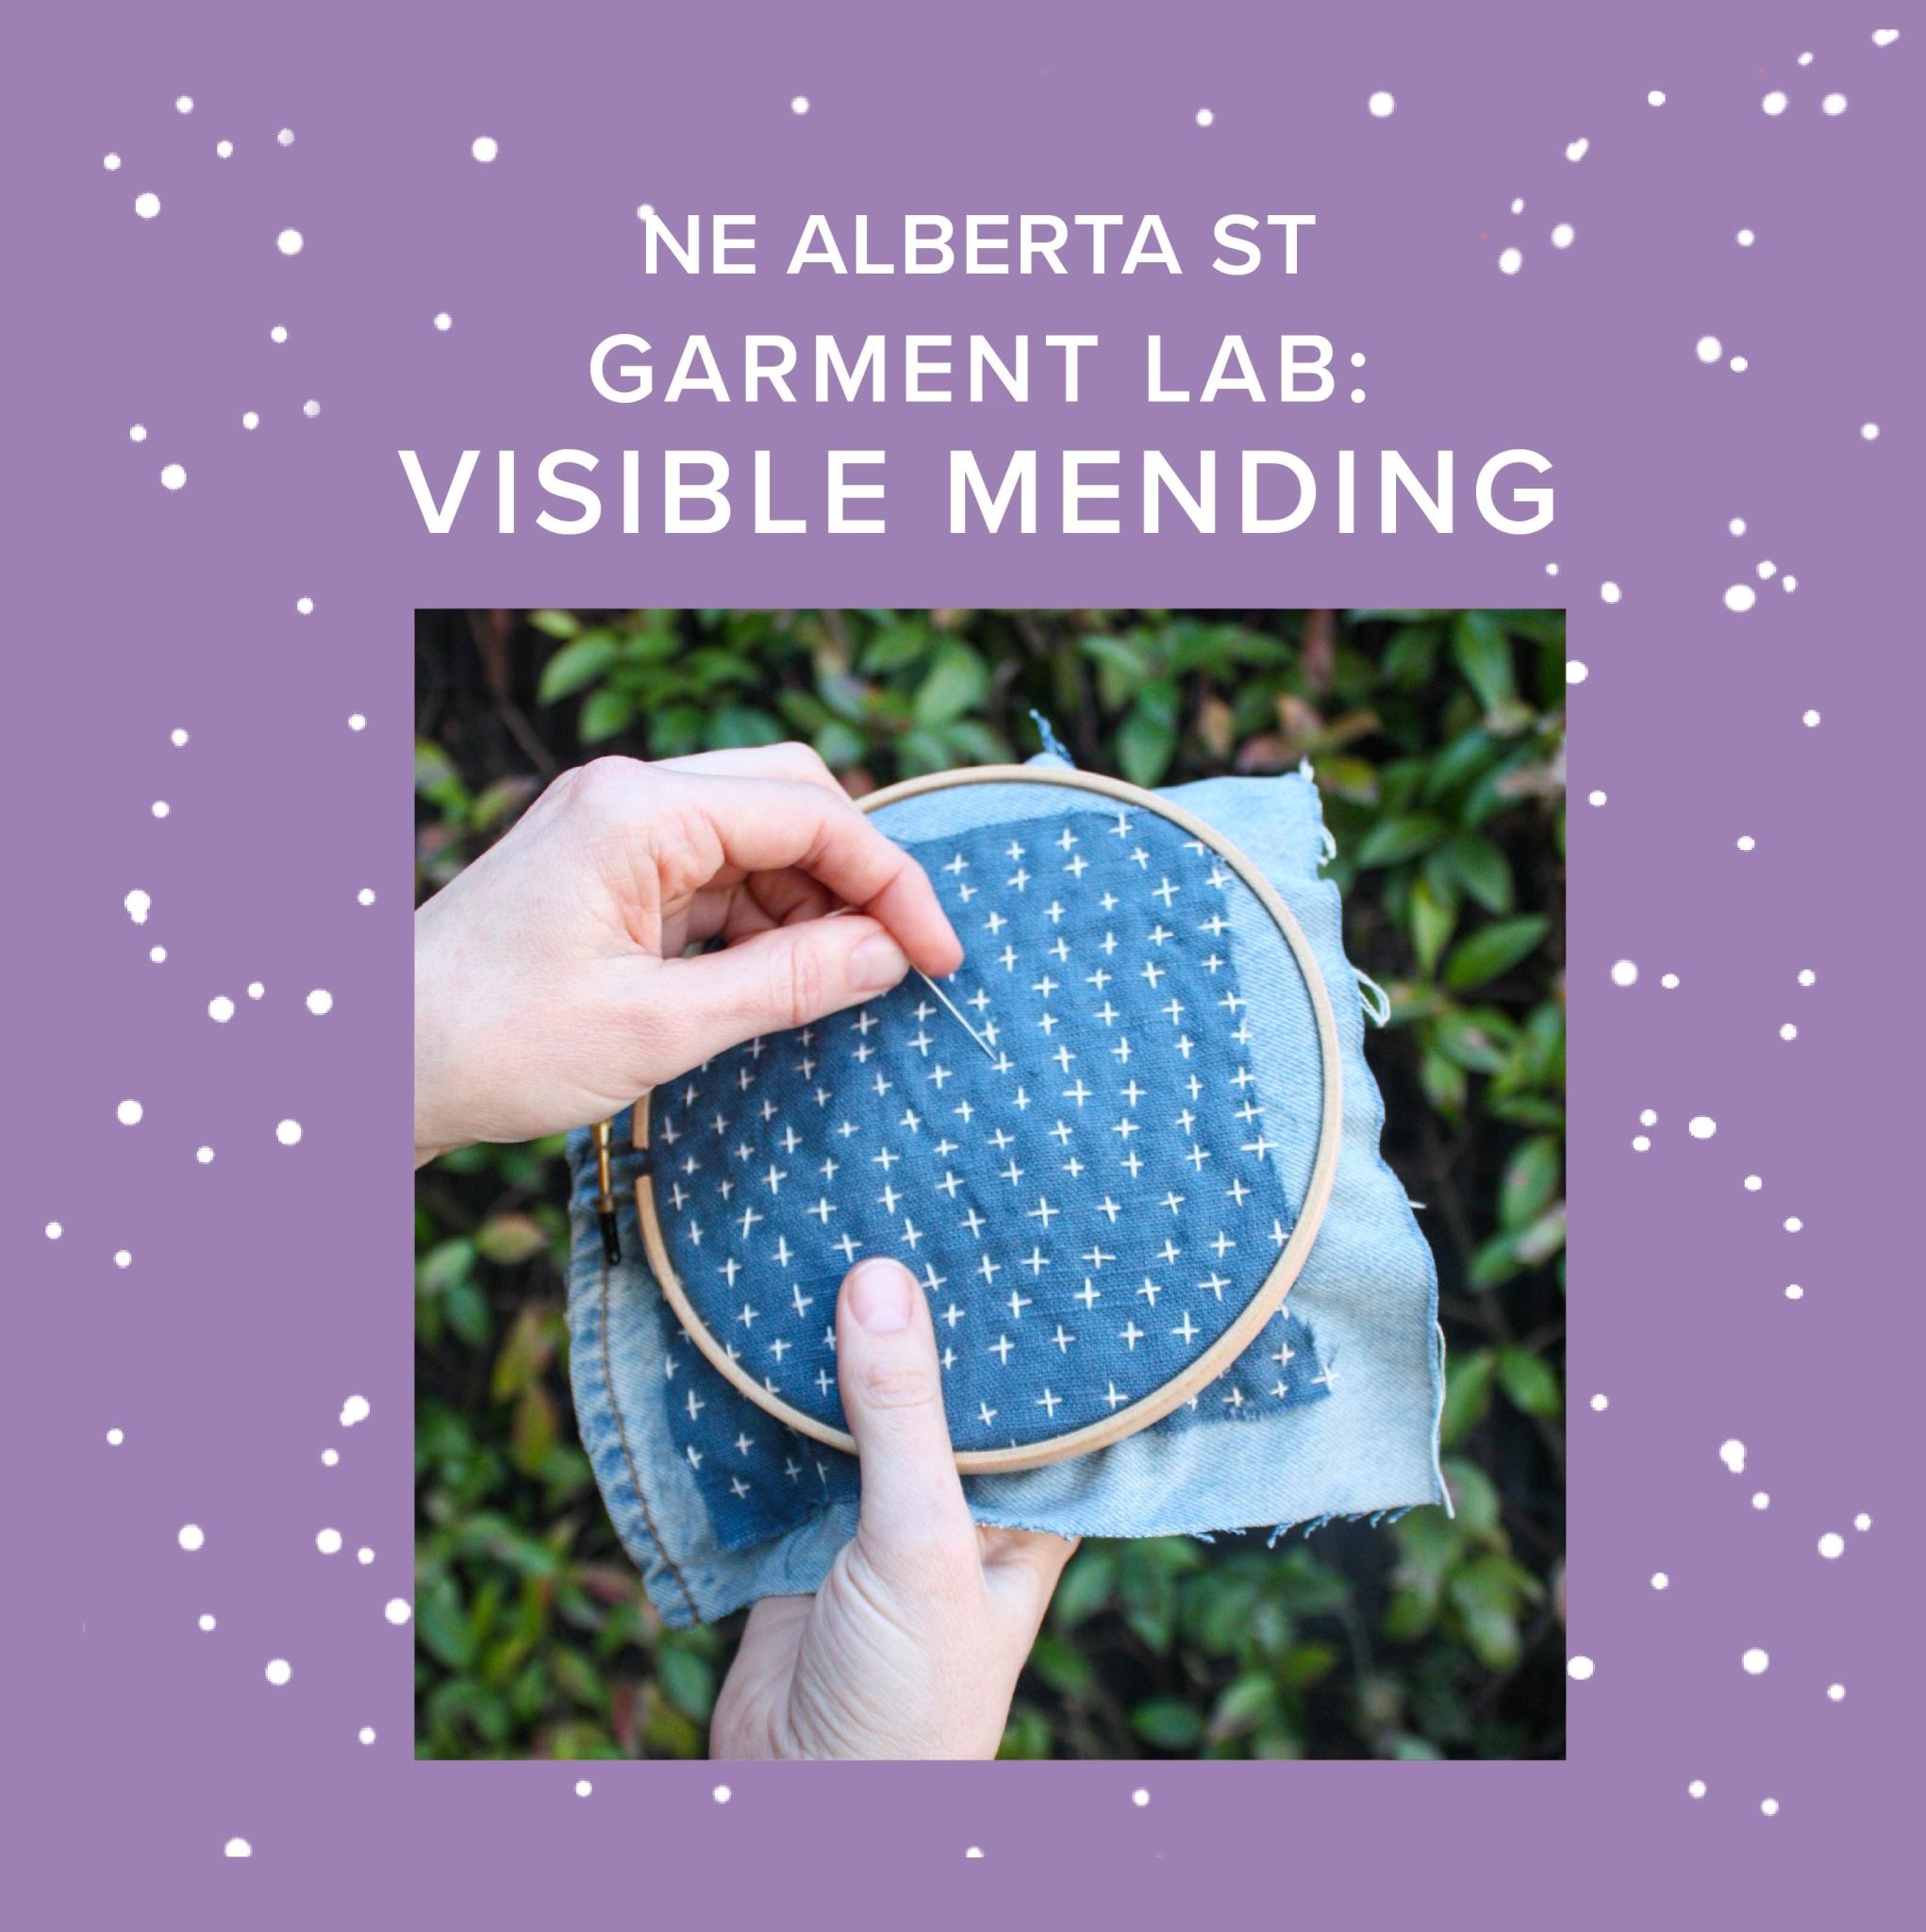 Vivien Wise CLASS FULL! Garment Lab: Visible Mending, Wednesday, May 29th, 5pm-8pm